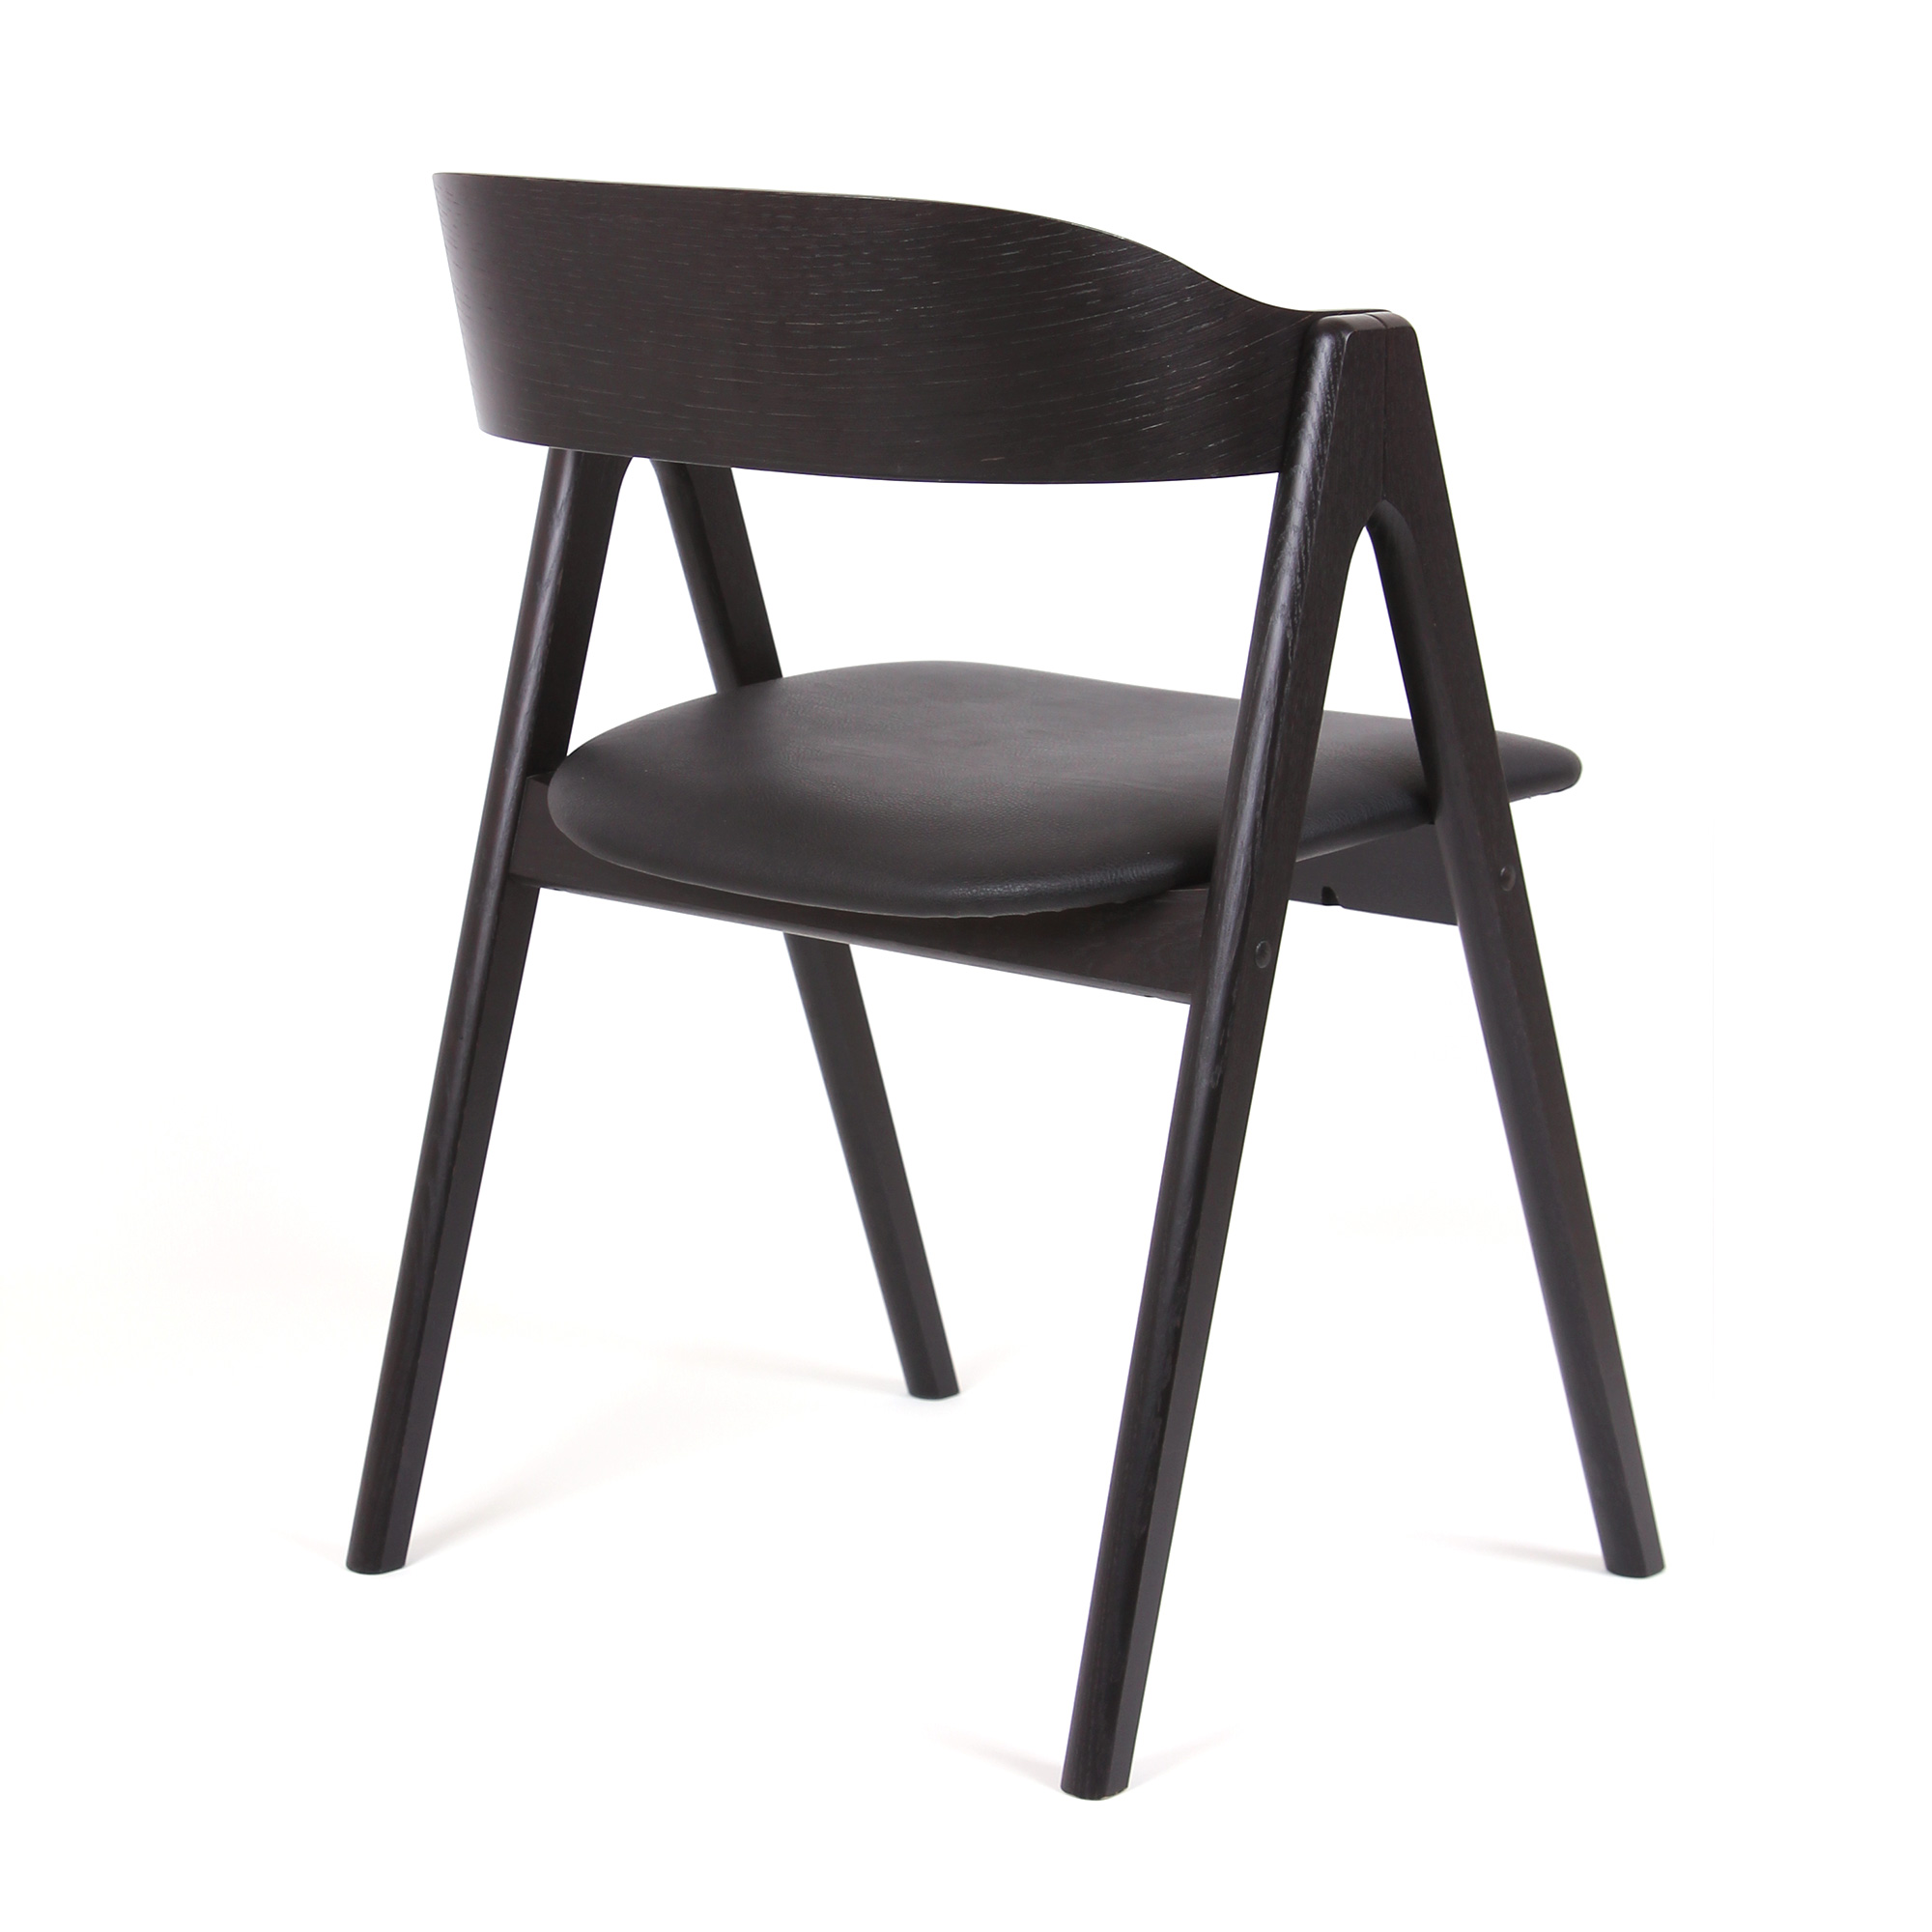 Mette Dining Chair by Carsten Buhl for Findahls Møbelfabrik